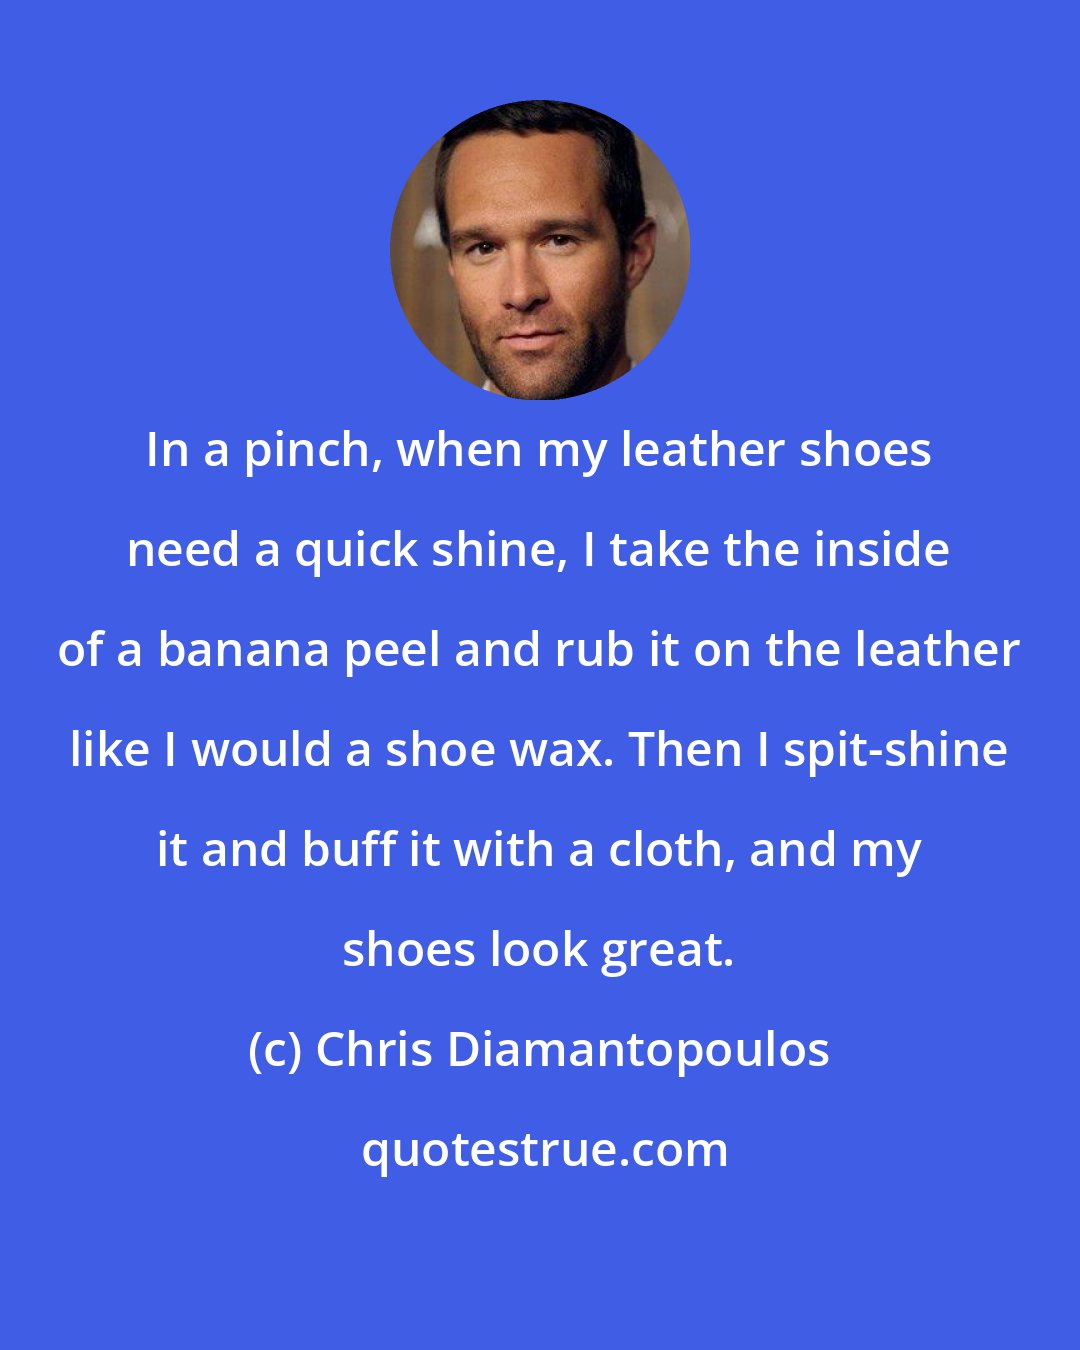 Chris Diamantopoulos: In a pinch, when my leather shoes need a quick shine, I take the inside of a banana peel and rub it on the leather like I would a shoe wax. Then I spit-shine it and buff it with a cloth, and my shoes look great.